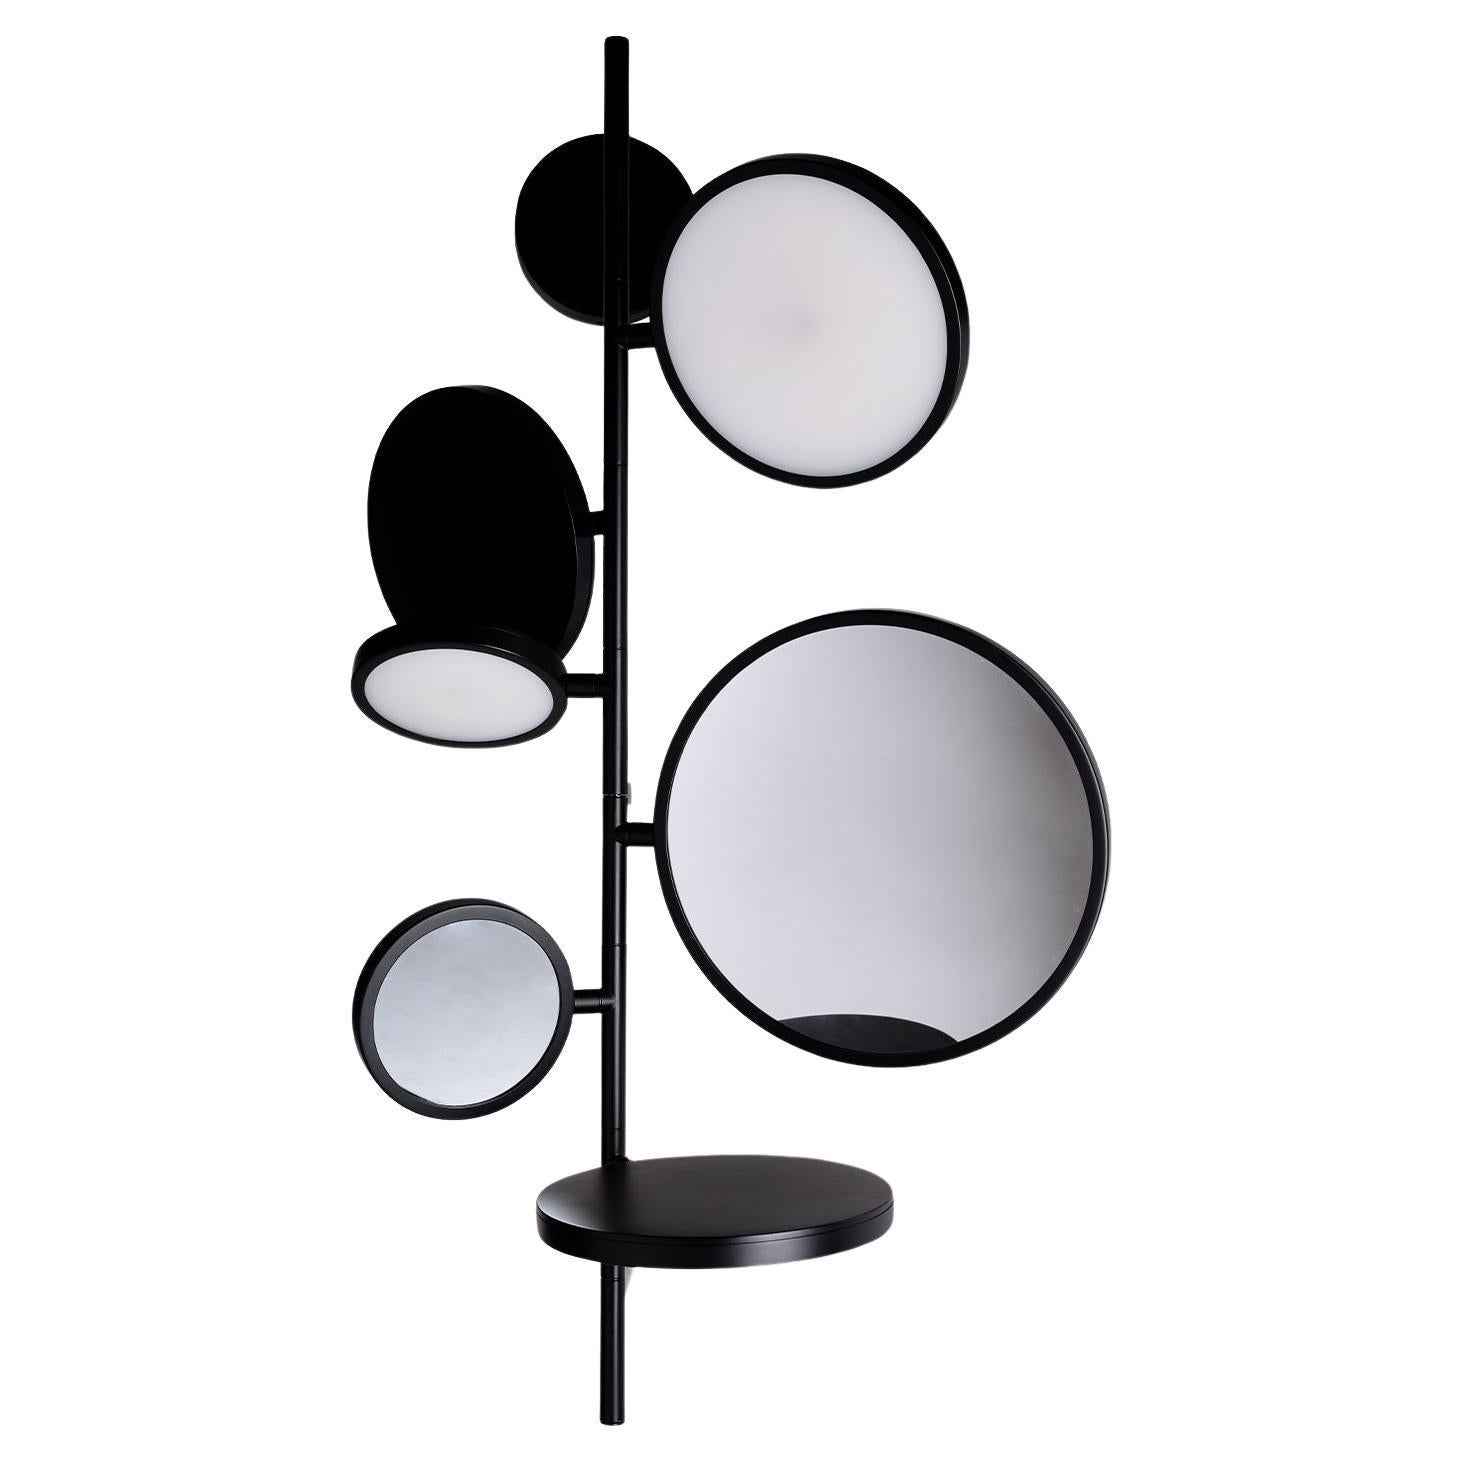 DCW Editions Tell Me Stories Mirror Light in Black by Giulia Liverani For Sale